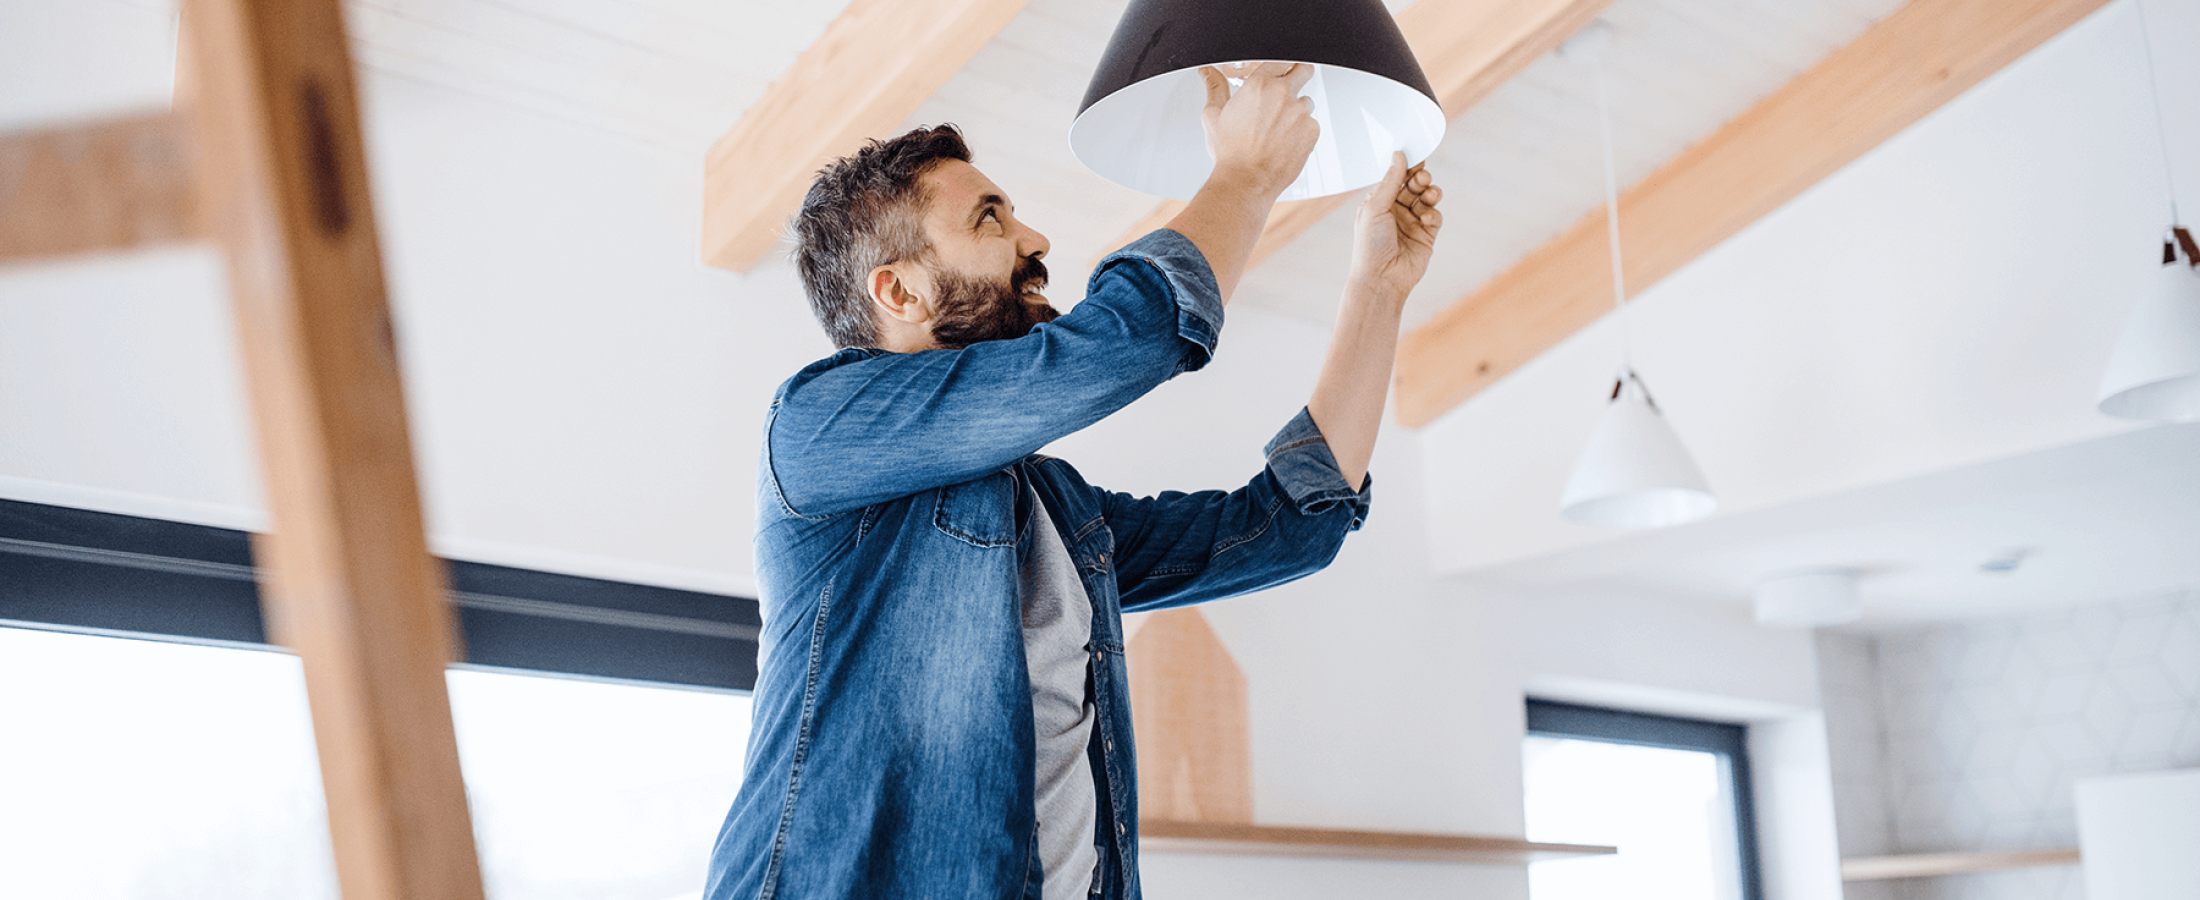 Tips for picking the best lighting for your home